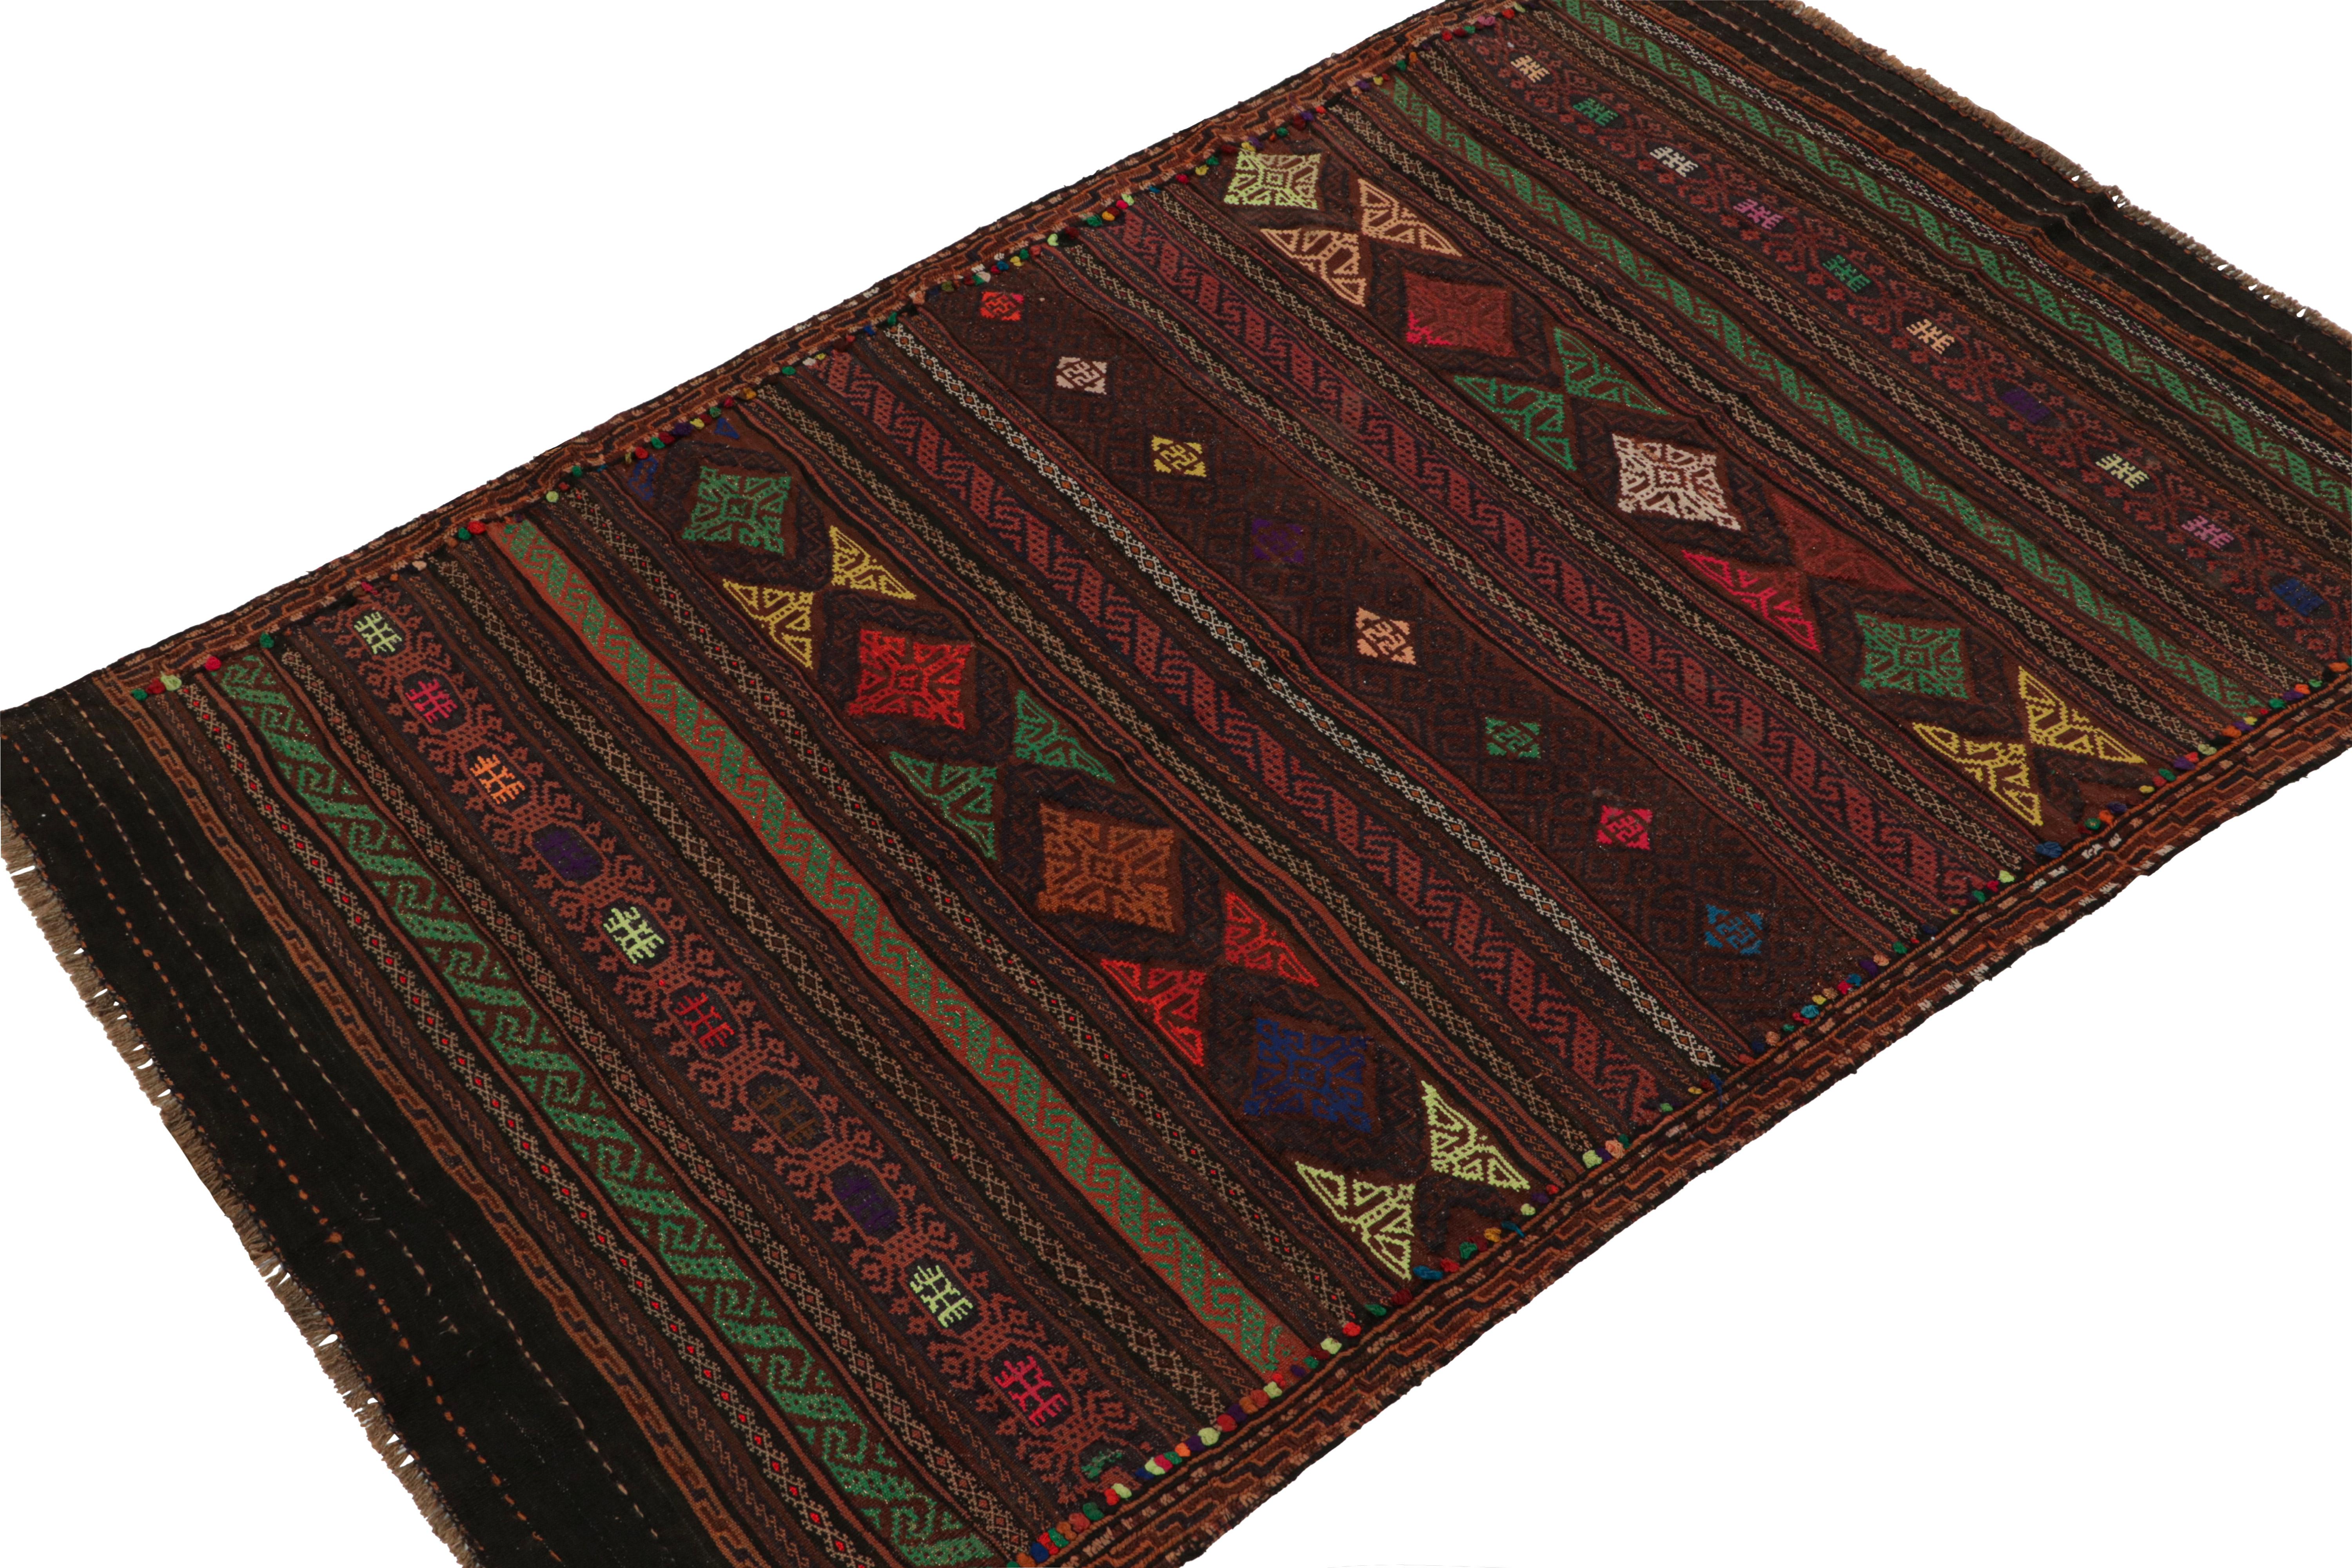 Handwoven in wool circa 1950-1960, this vintage tribal kilim rug from the Baluch tribe is the latest to join Rug & Kilim’s collection of coveted flatweaves. 

On the Design:

Specifically believed to be coming from the Leghari clan of the Baluch